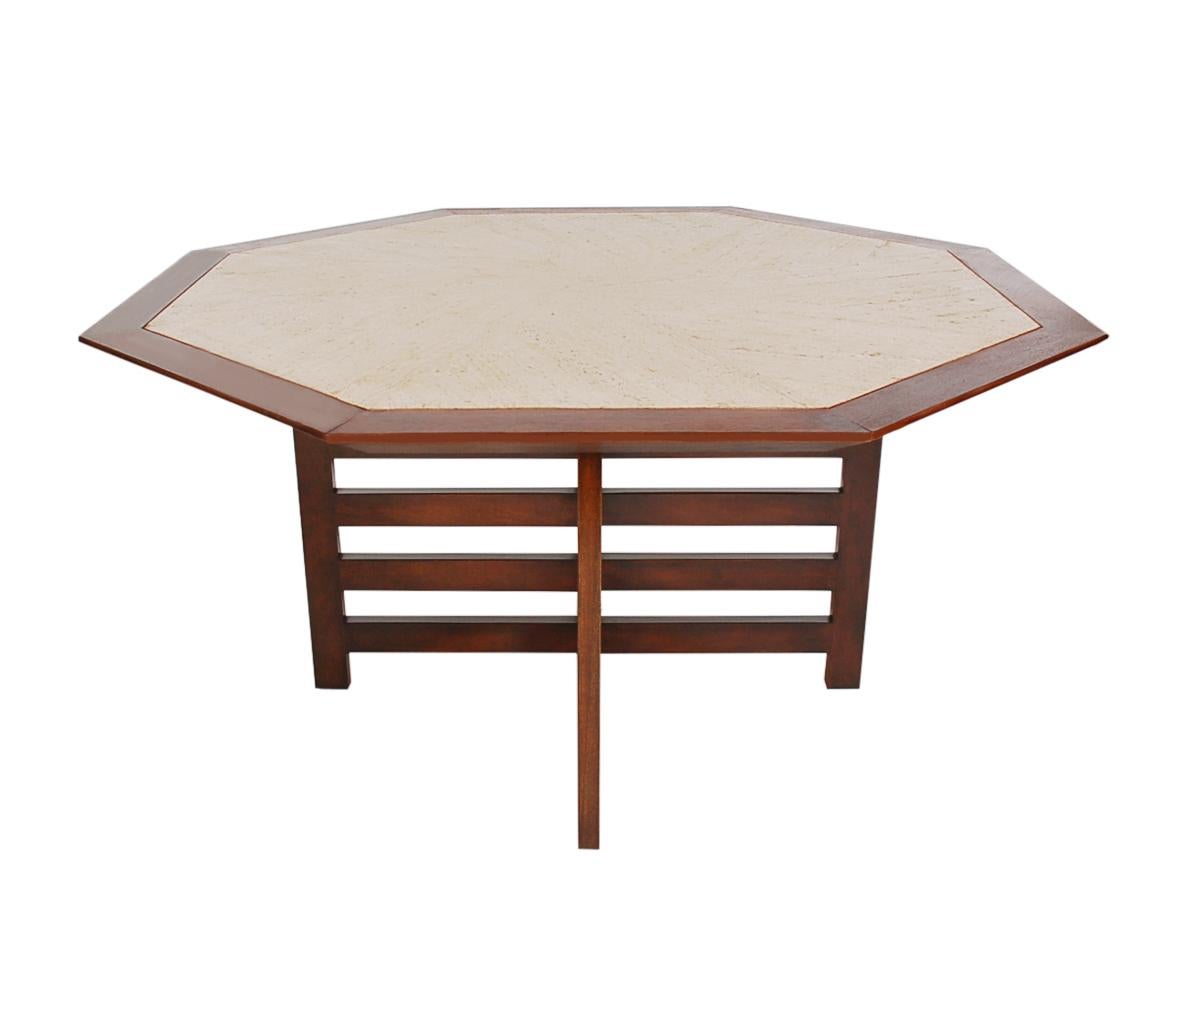 A beautiful octagonal form dining table designed and produced by Harvey Probber in the 1950s. It features solid walnut construction, inlayed travertine marble, and an X-form base.